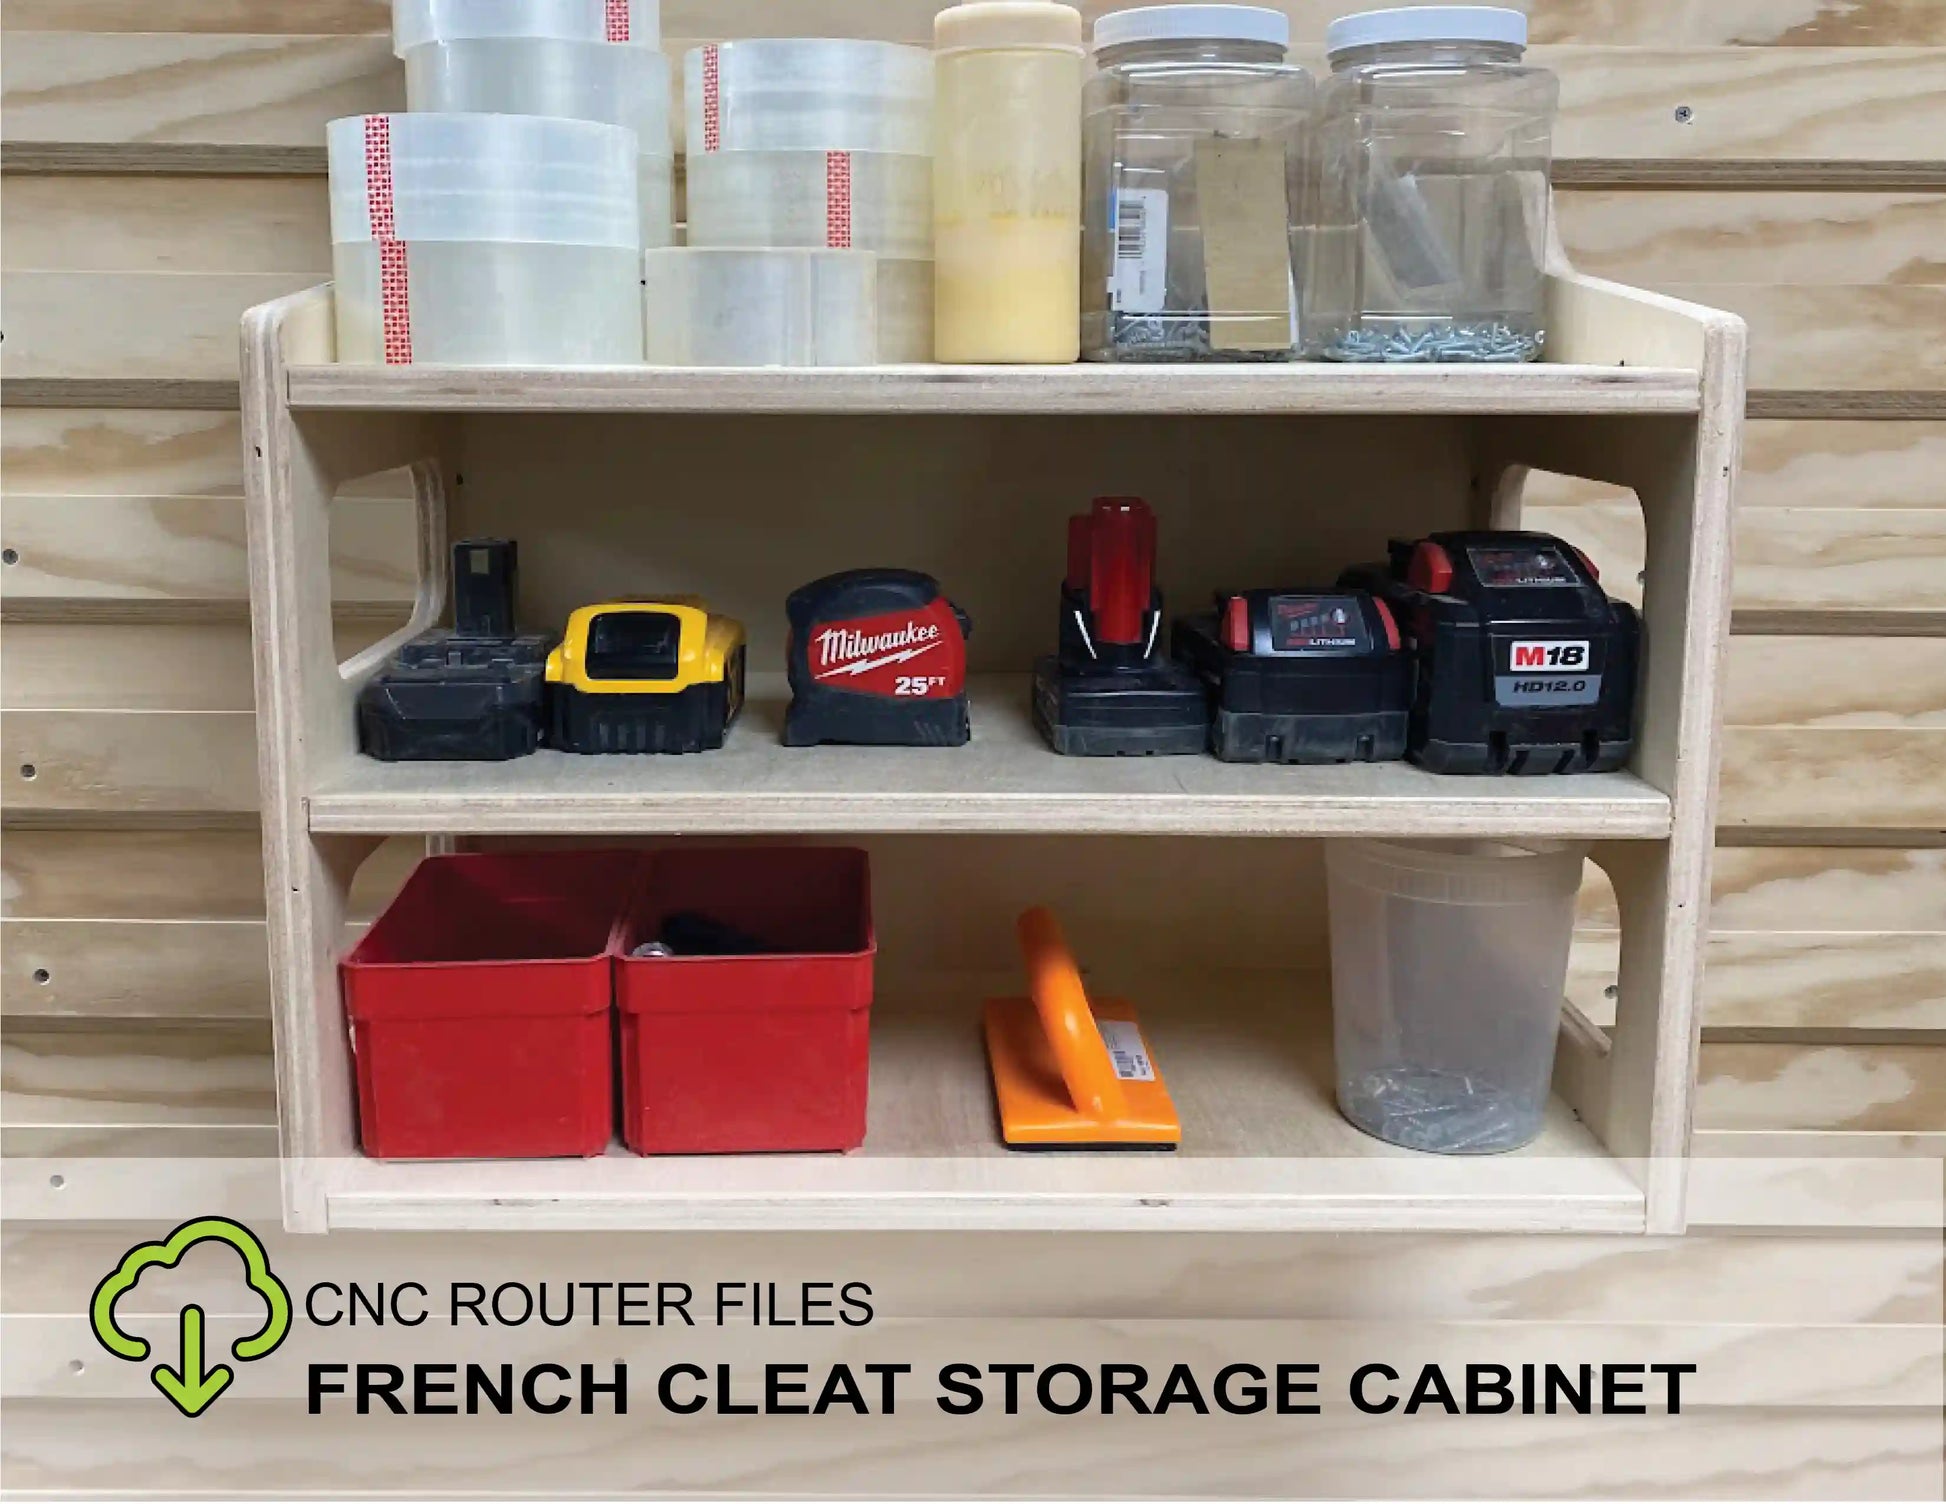 CNC Router Files French Cleat Storage Cabinet Shelving – dryforge